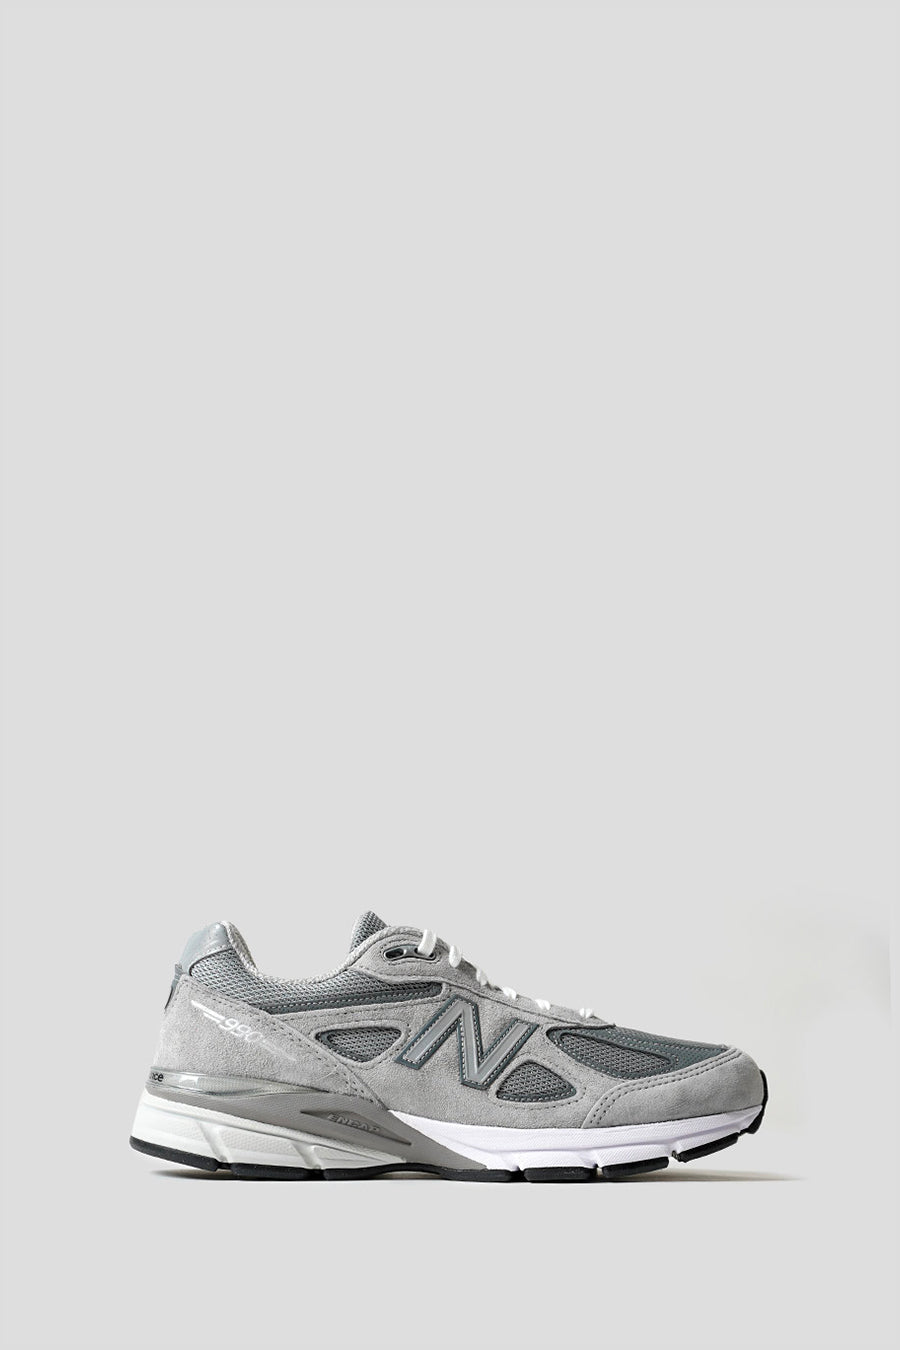 NEW BALANCE - SNEAKERS 990V4 MADE IN USA GREY AND SILVER - LE LABO STORE